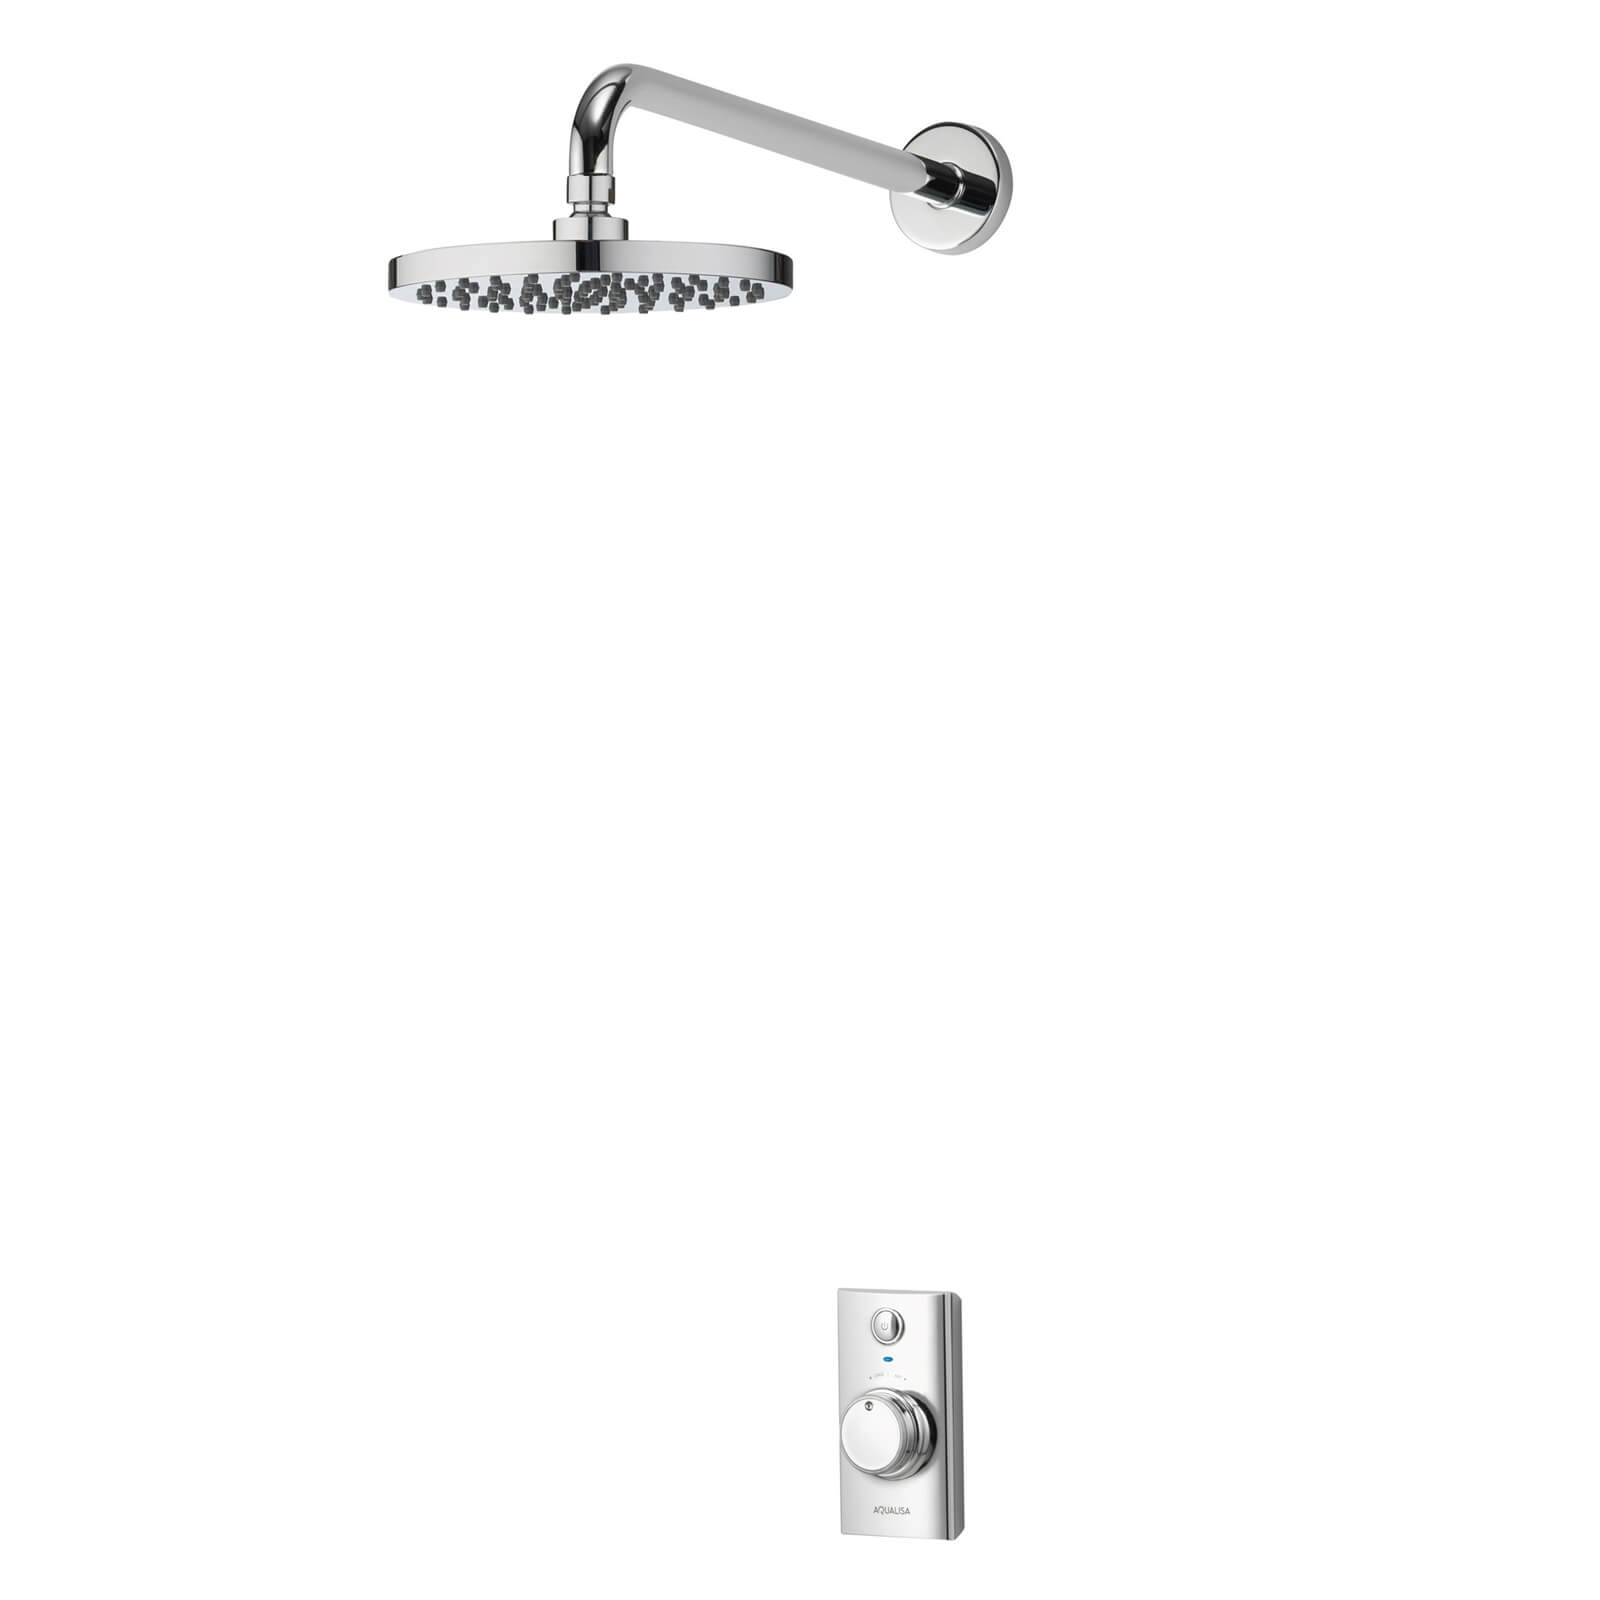 Aqualisa Visage Concealed with Fixed Wall Head - High Pressure/Combi